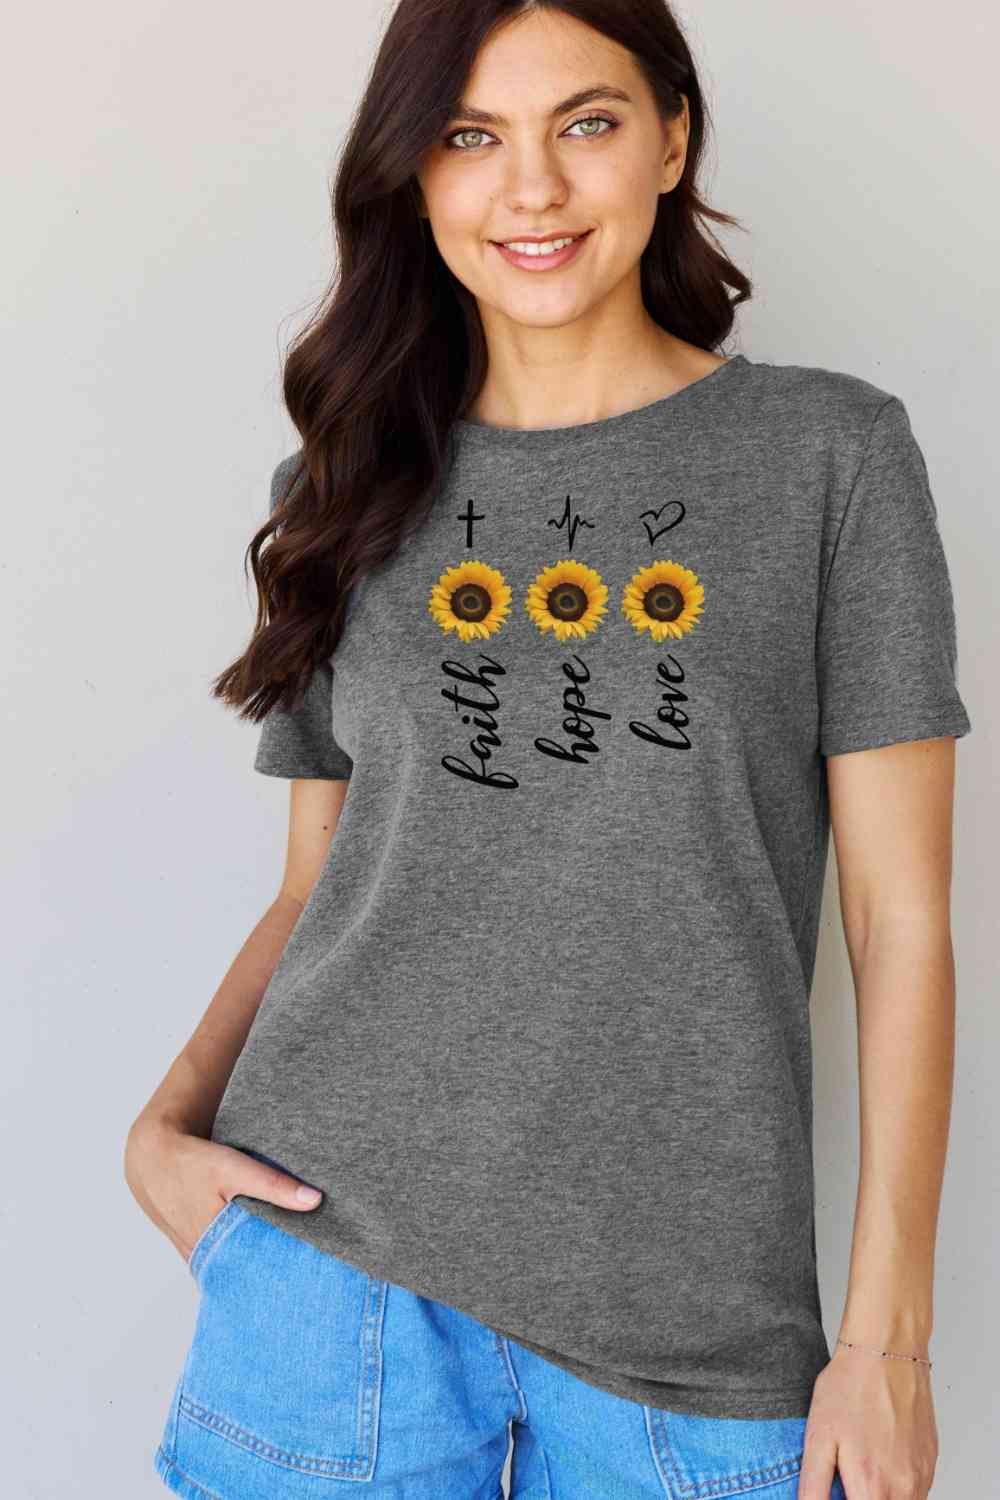 Simply Love Full Size Sunflower Graphic T-Shirt